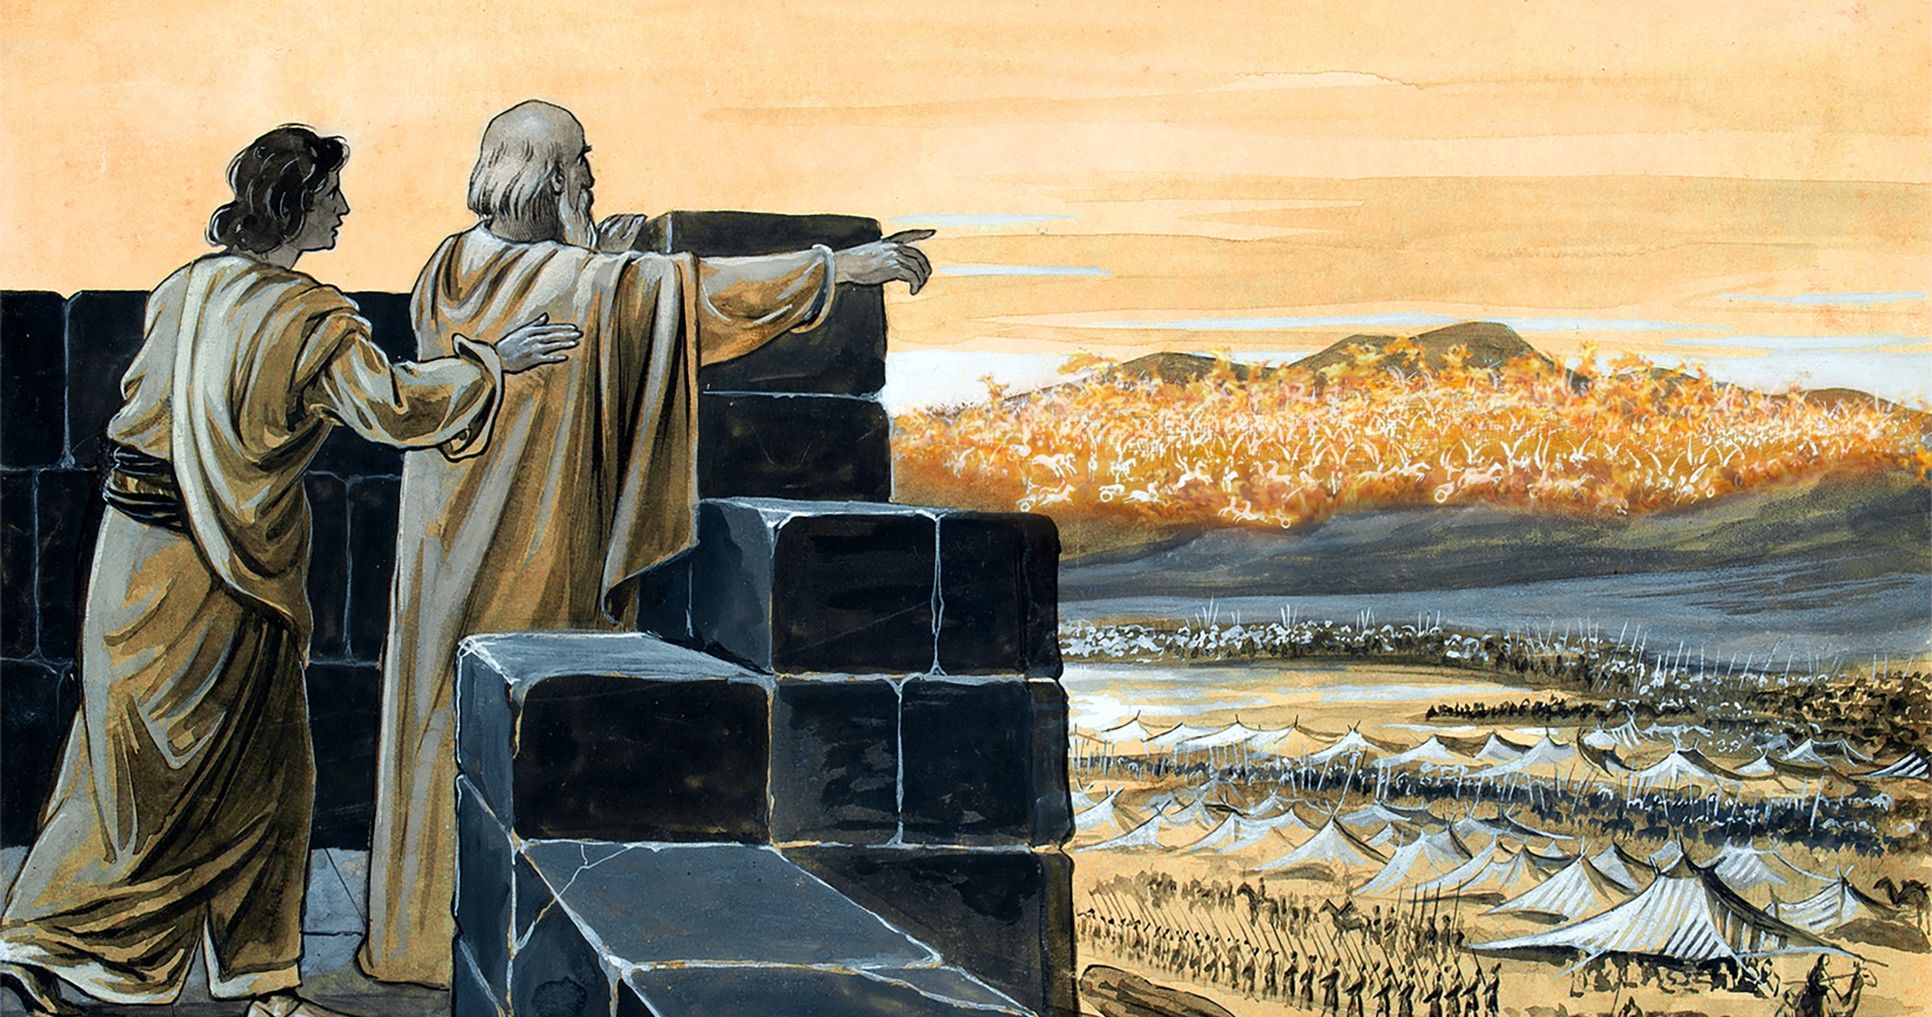 Illustration of Elisha showing his servant the chariots of fire, © Review & Herald Publishing/licensed from goodsalt.com. Image via Church of Jesus Christ.